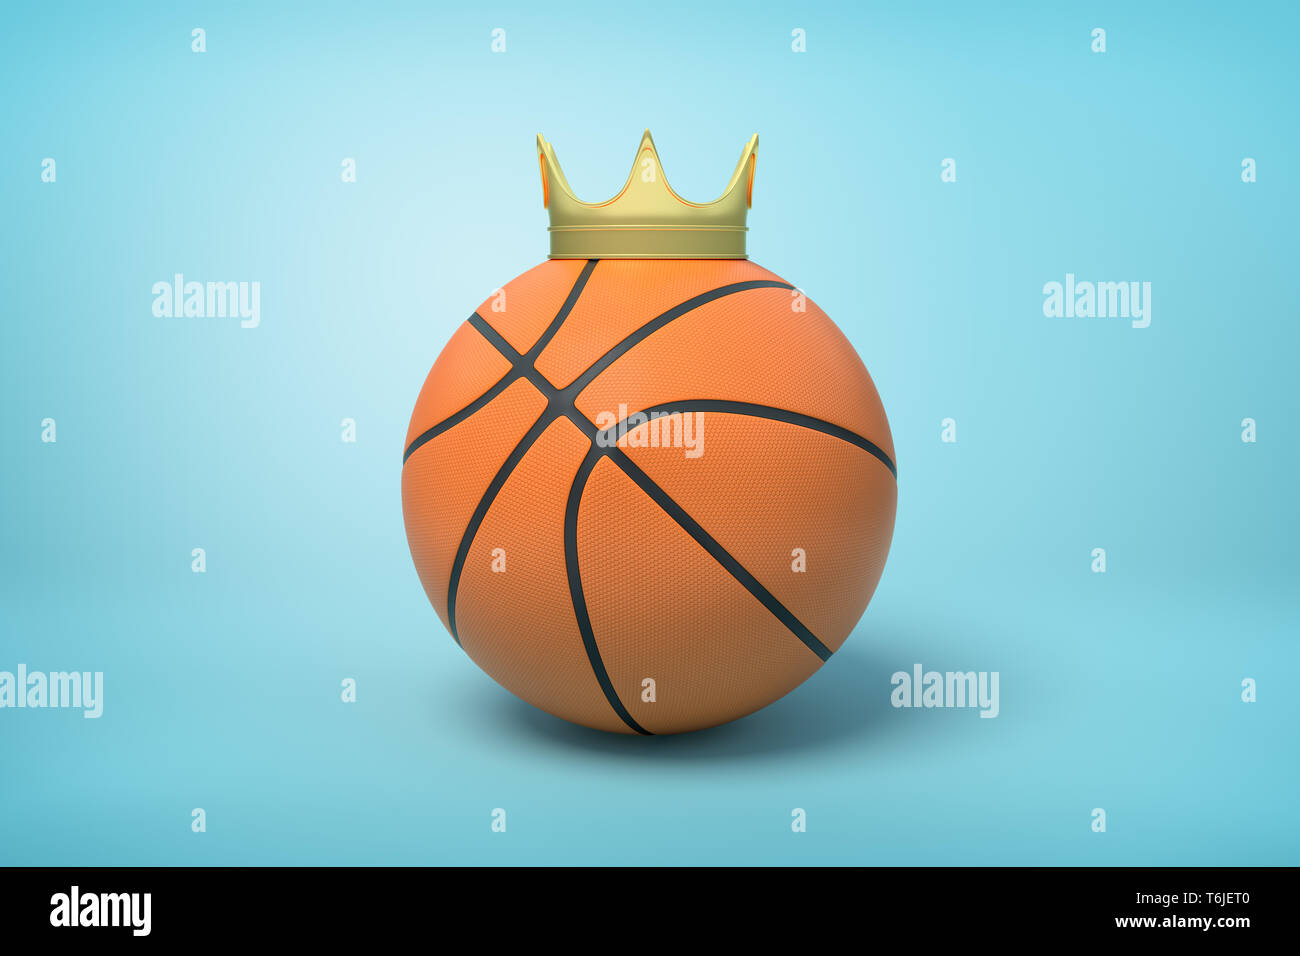 3d close-up rendering of basketball with small golden crown on top on light-blue background. Stock Photo